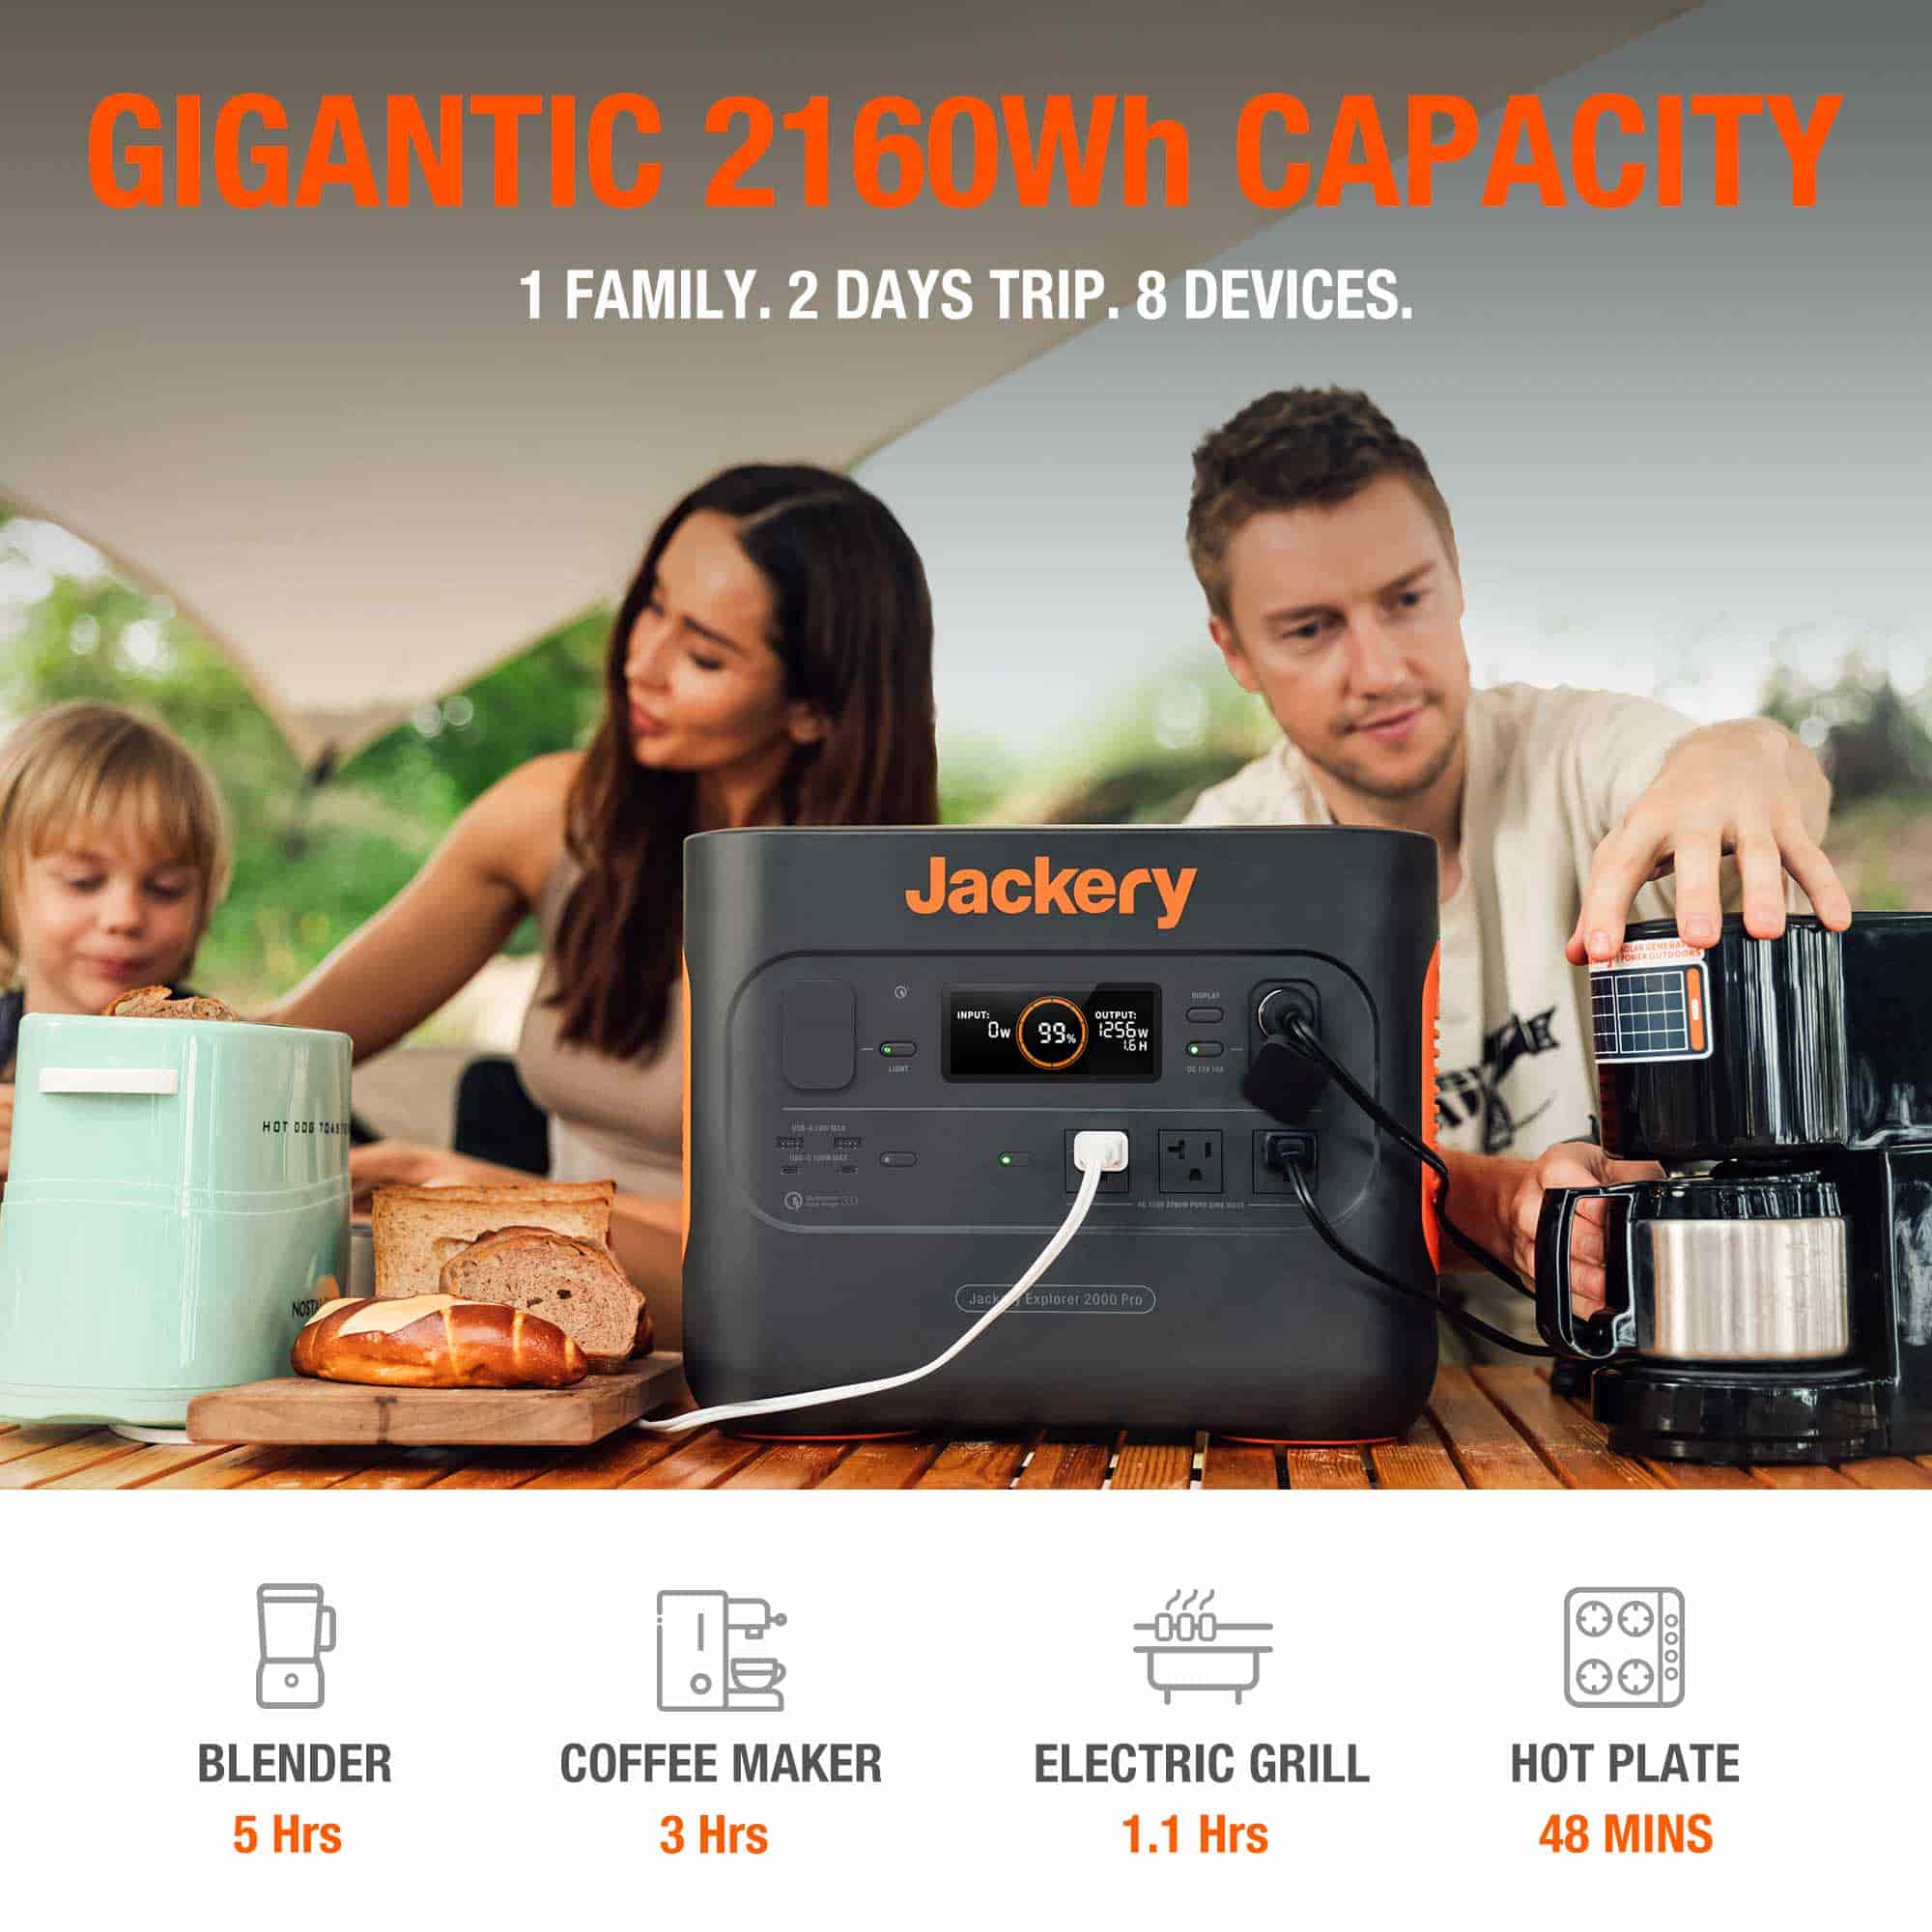 Jackery Explorer 2000 Pro review: Lots of emergency power, but is